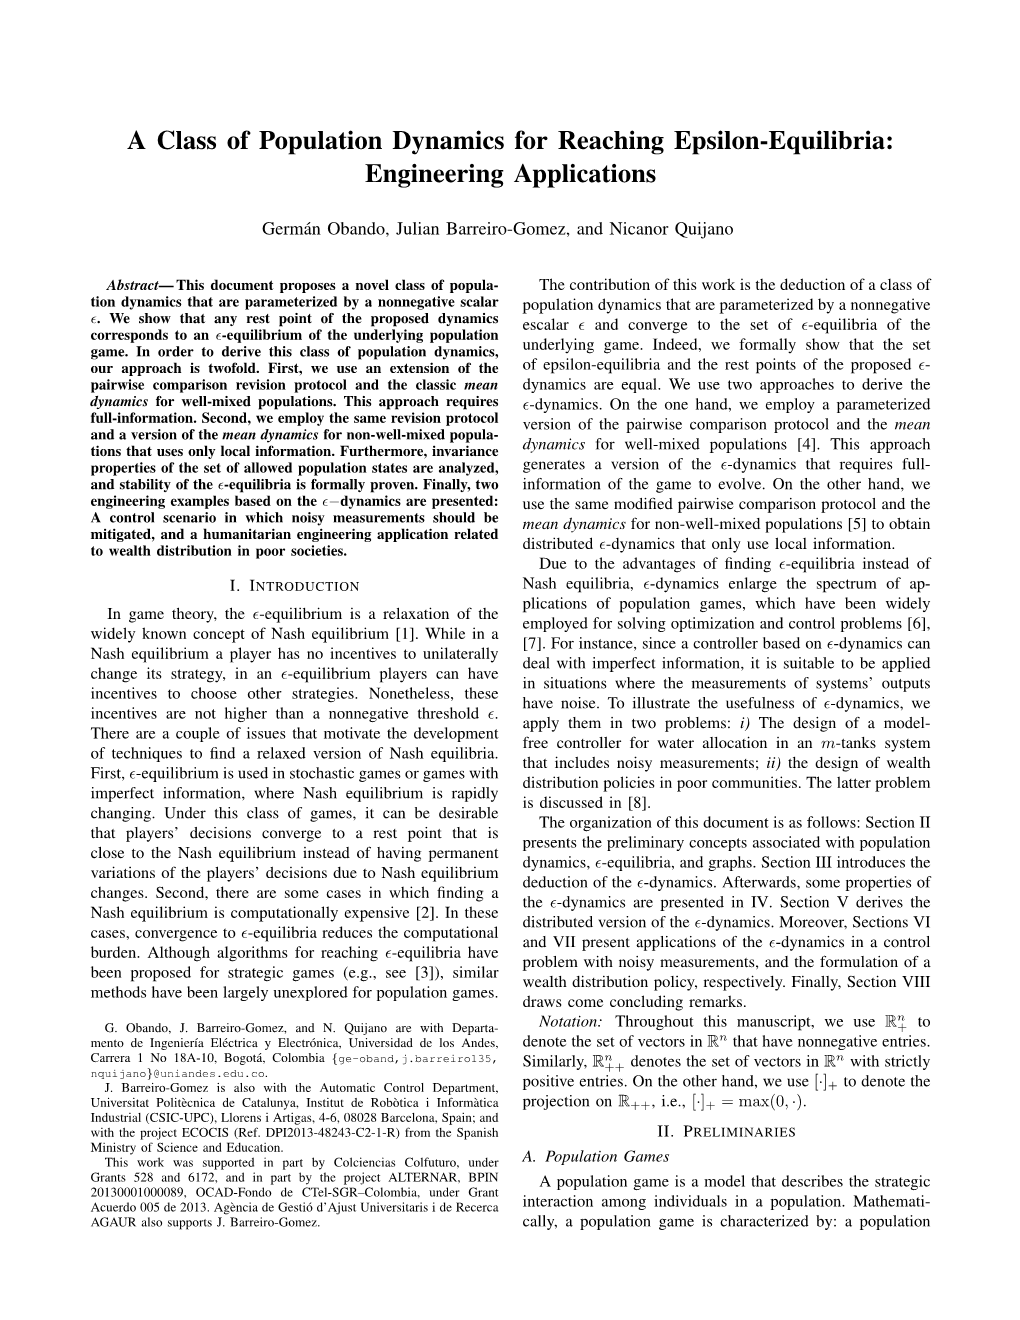 A Class of Population Dynamics for Reaching Epsilon-Equilibria: Engineering Applications